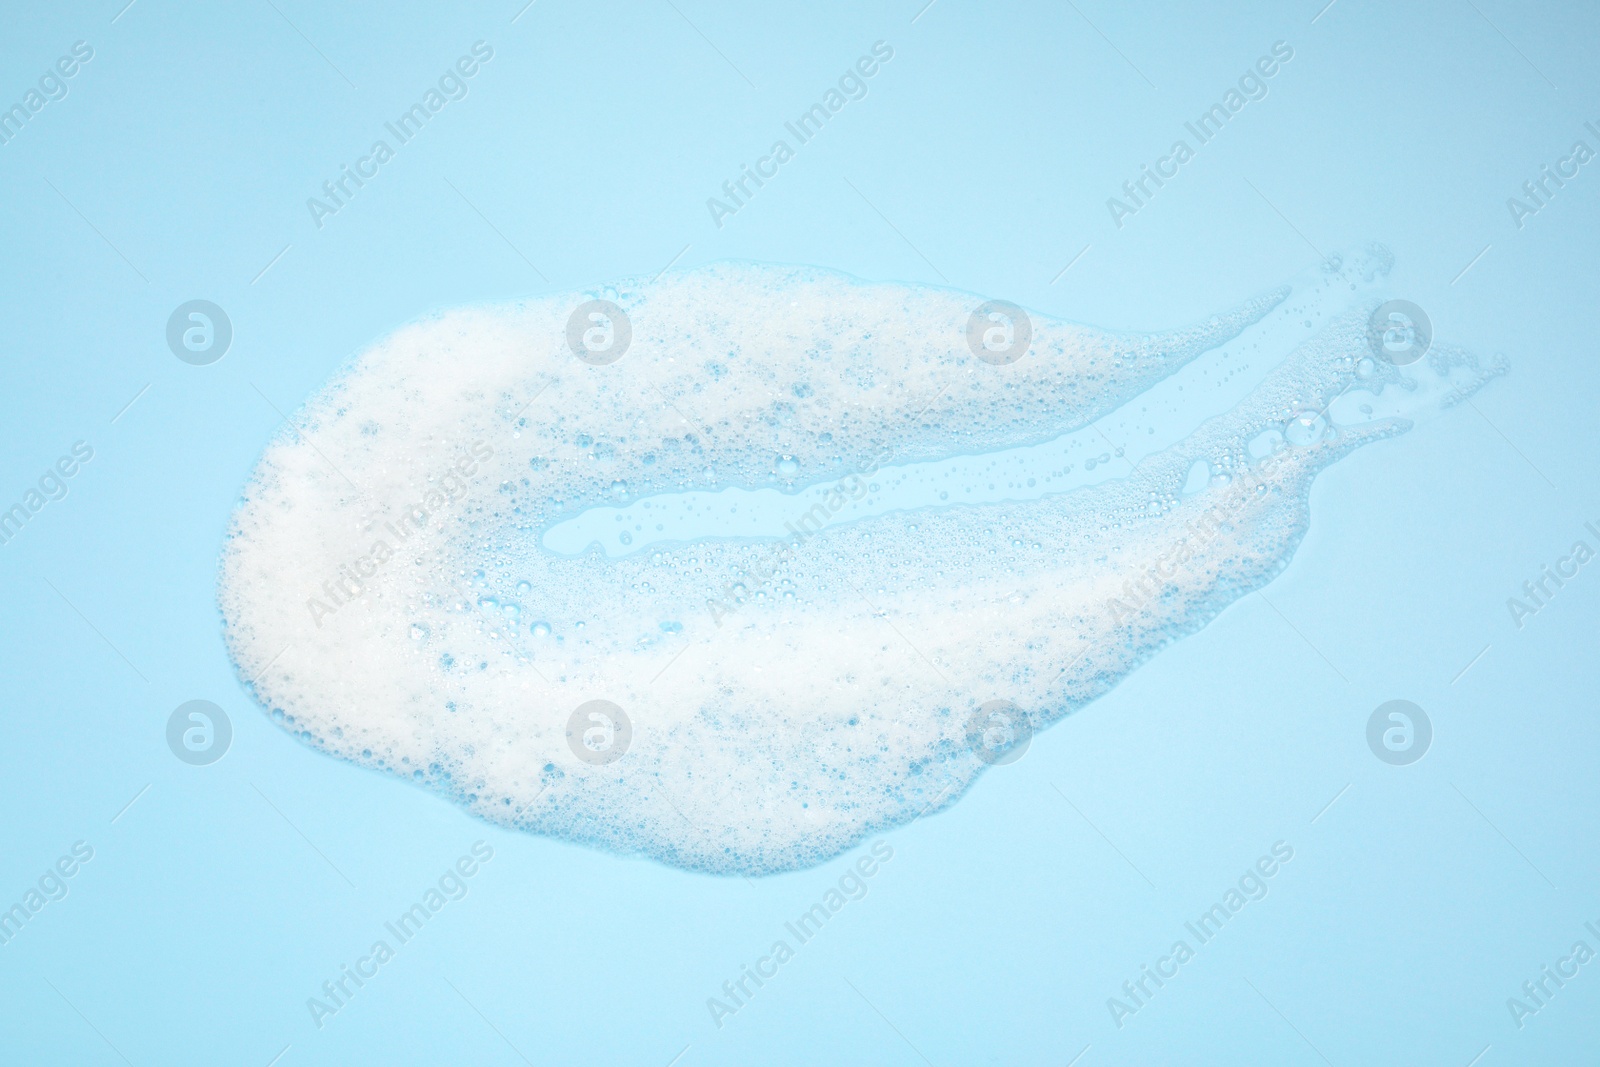 Photo of Smudge of white washing foam on light blue background, top view